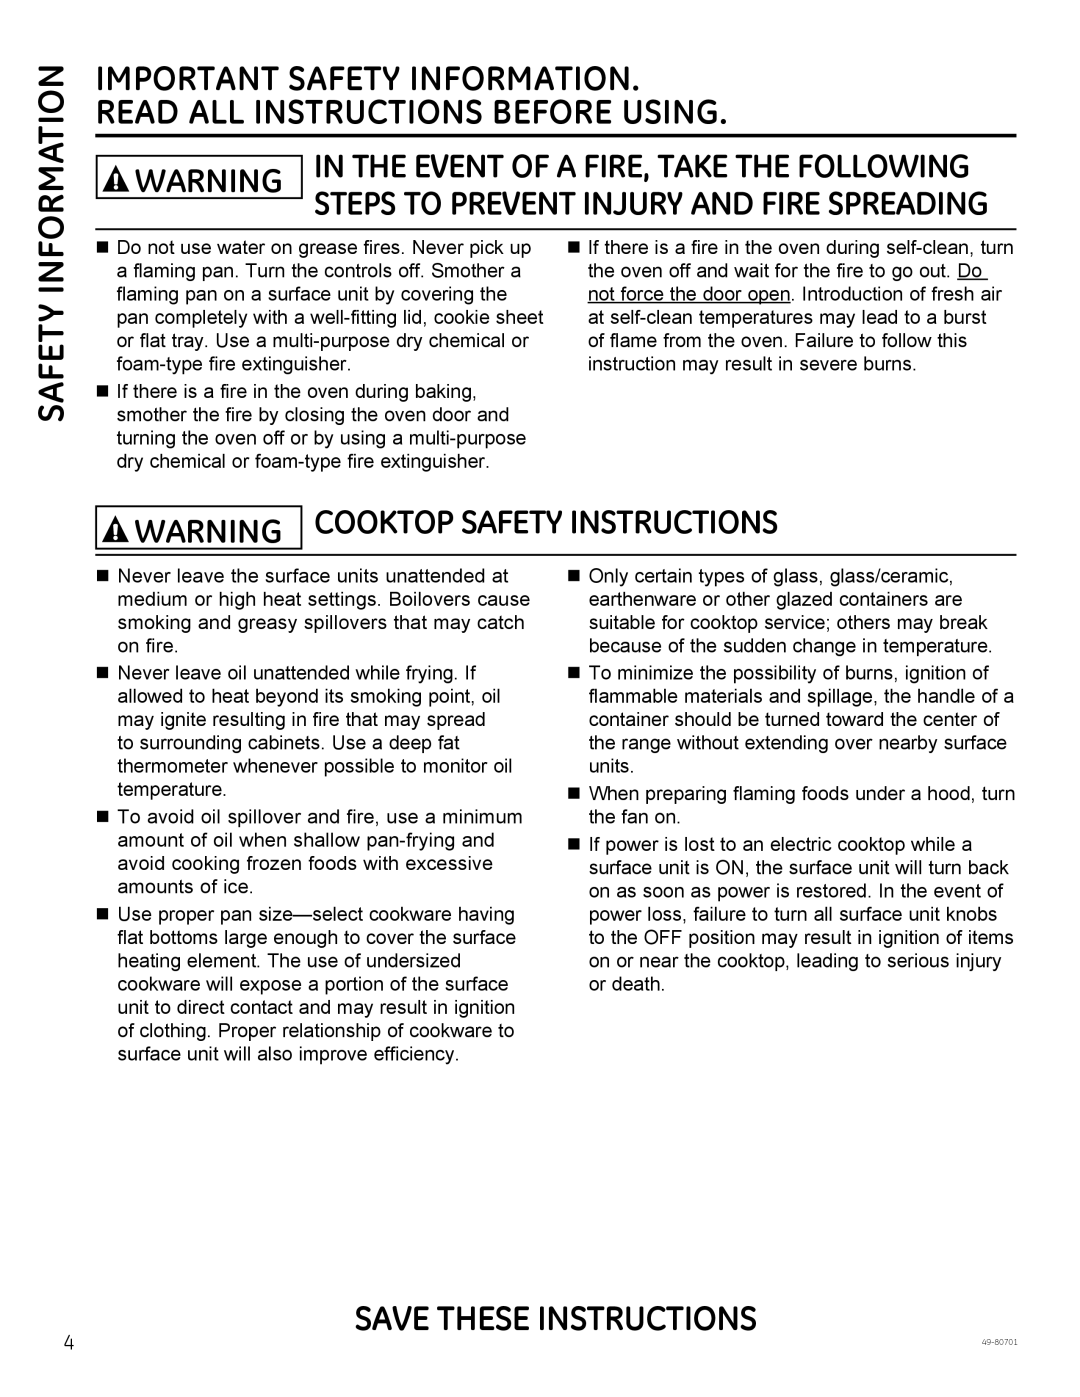 GE JB870, JB850, PB950 Information, Warning Cooktop Safety Instructions, In The Event Of A Fire, Take The Following 